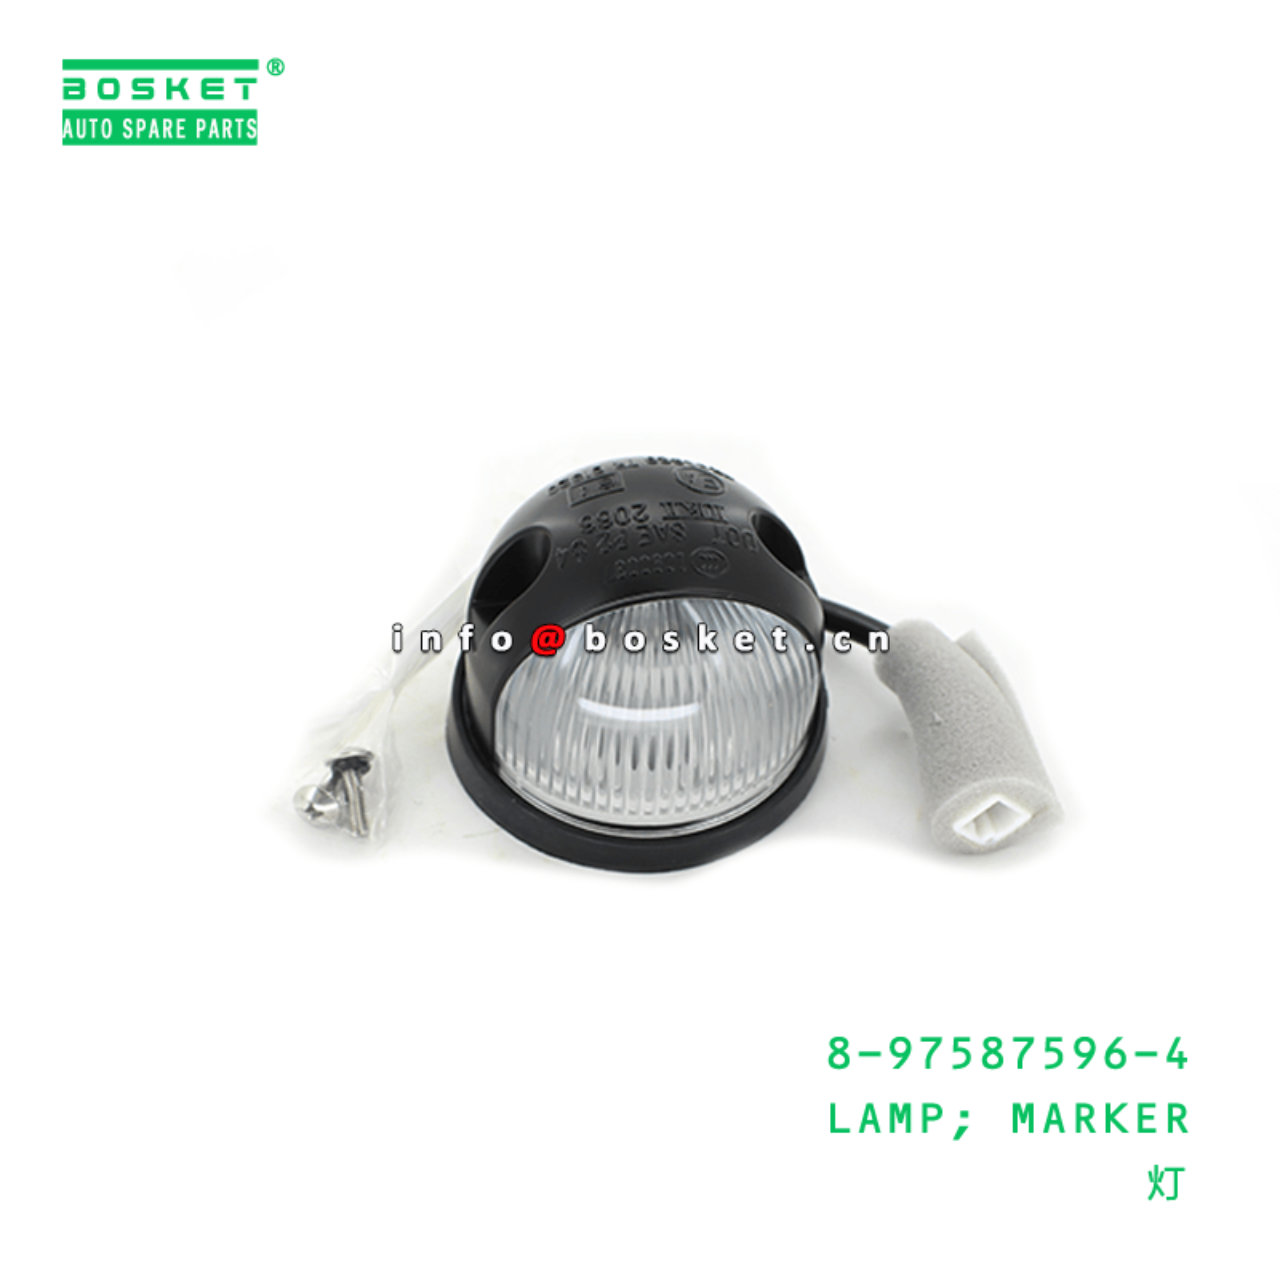 8-97587596-4 Marker Lamp Suitable for ISUZU F Series Truck 8975875964